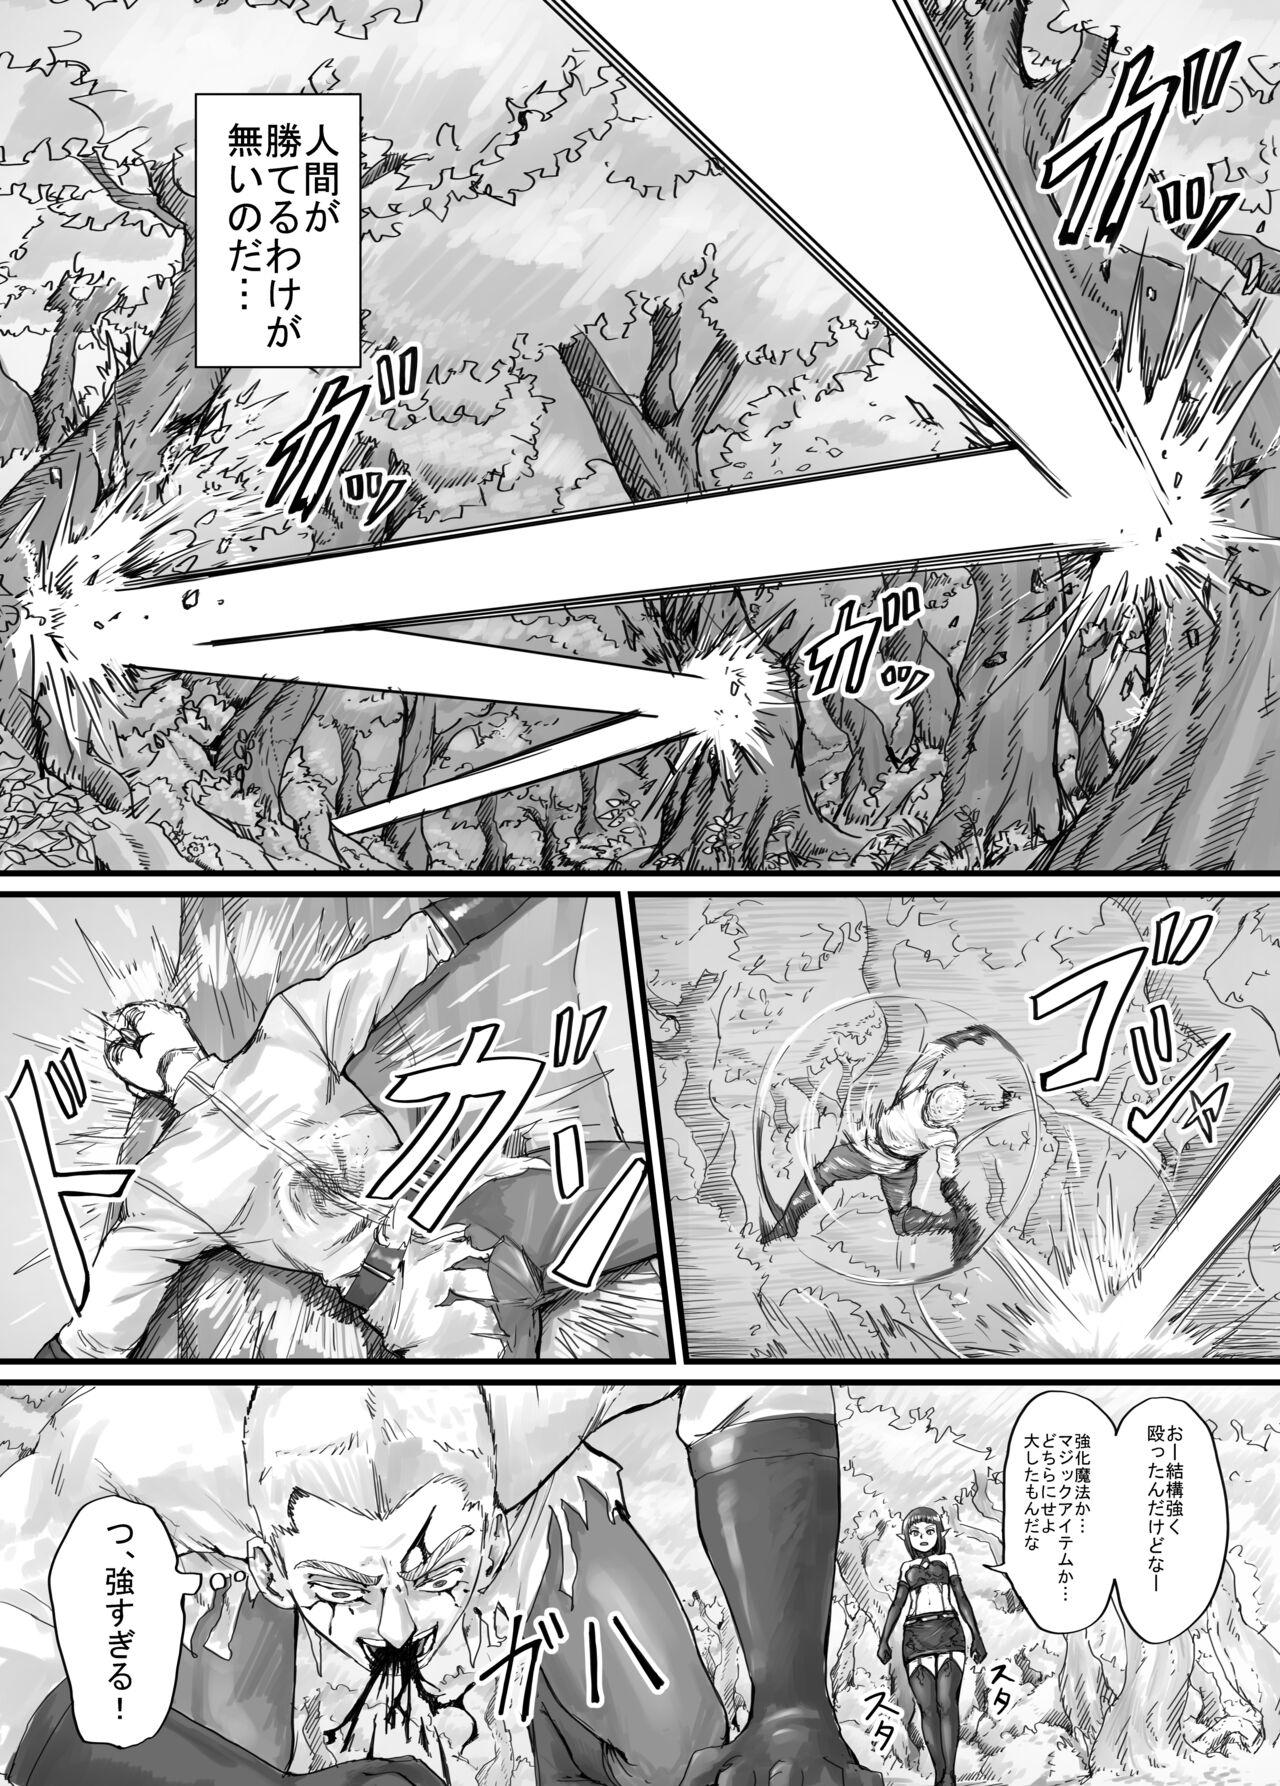 Gay Trimmed 魔族ちゃん漫画1 - Original Deutsch - Page 9